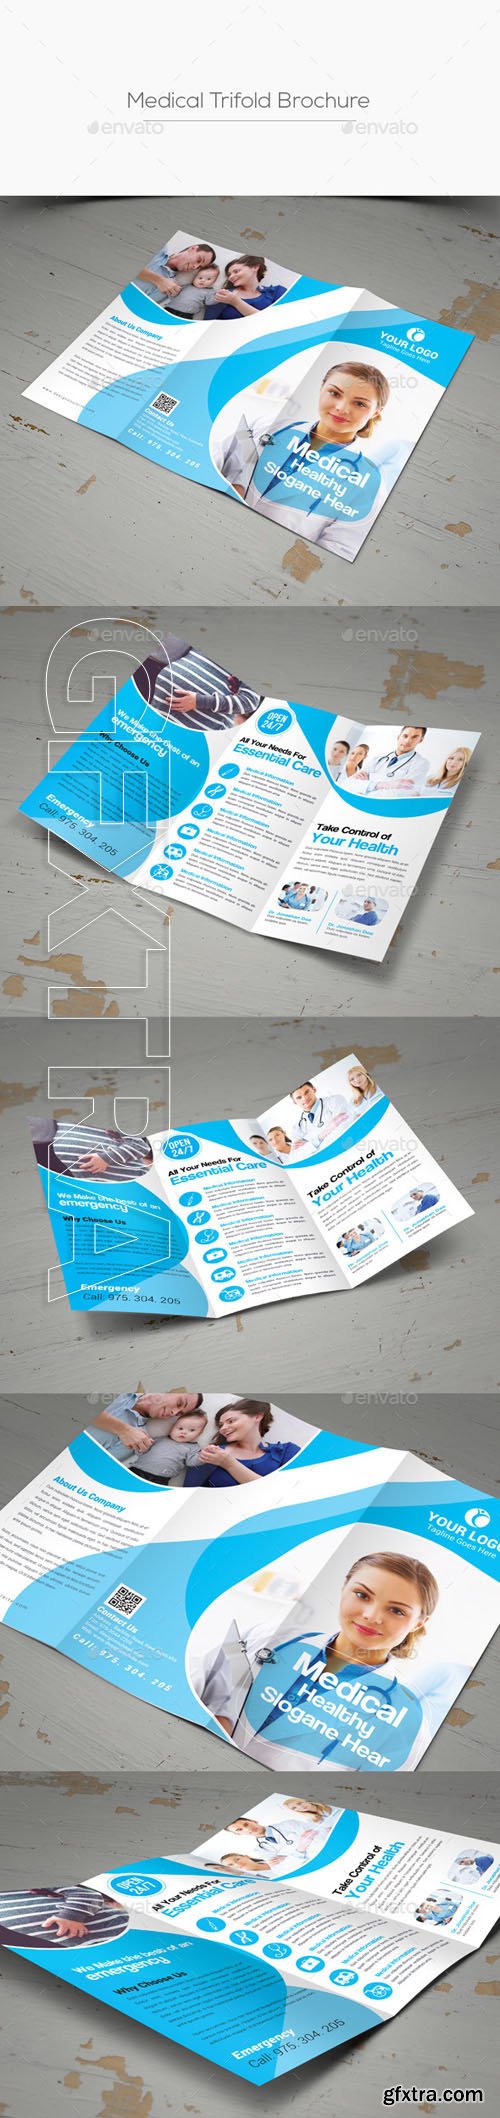 GraphicRiver - Medical Trifold Brochure 20563402